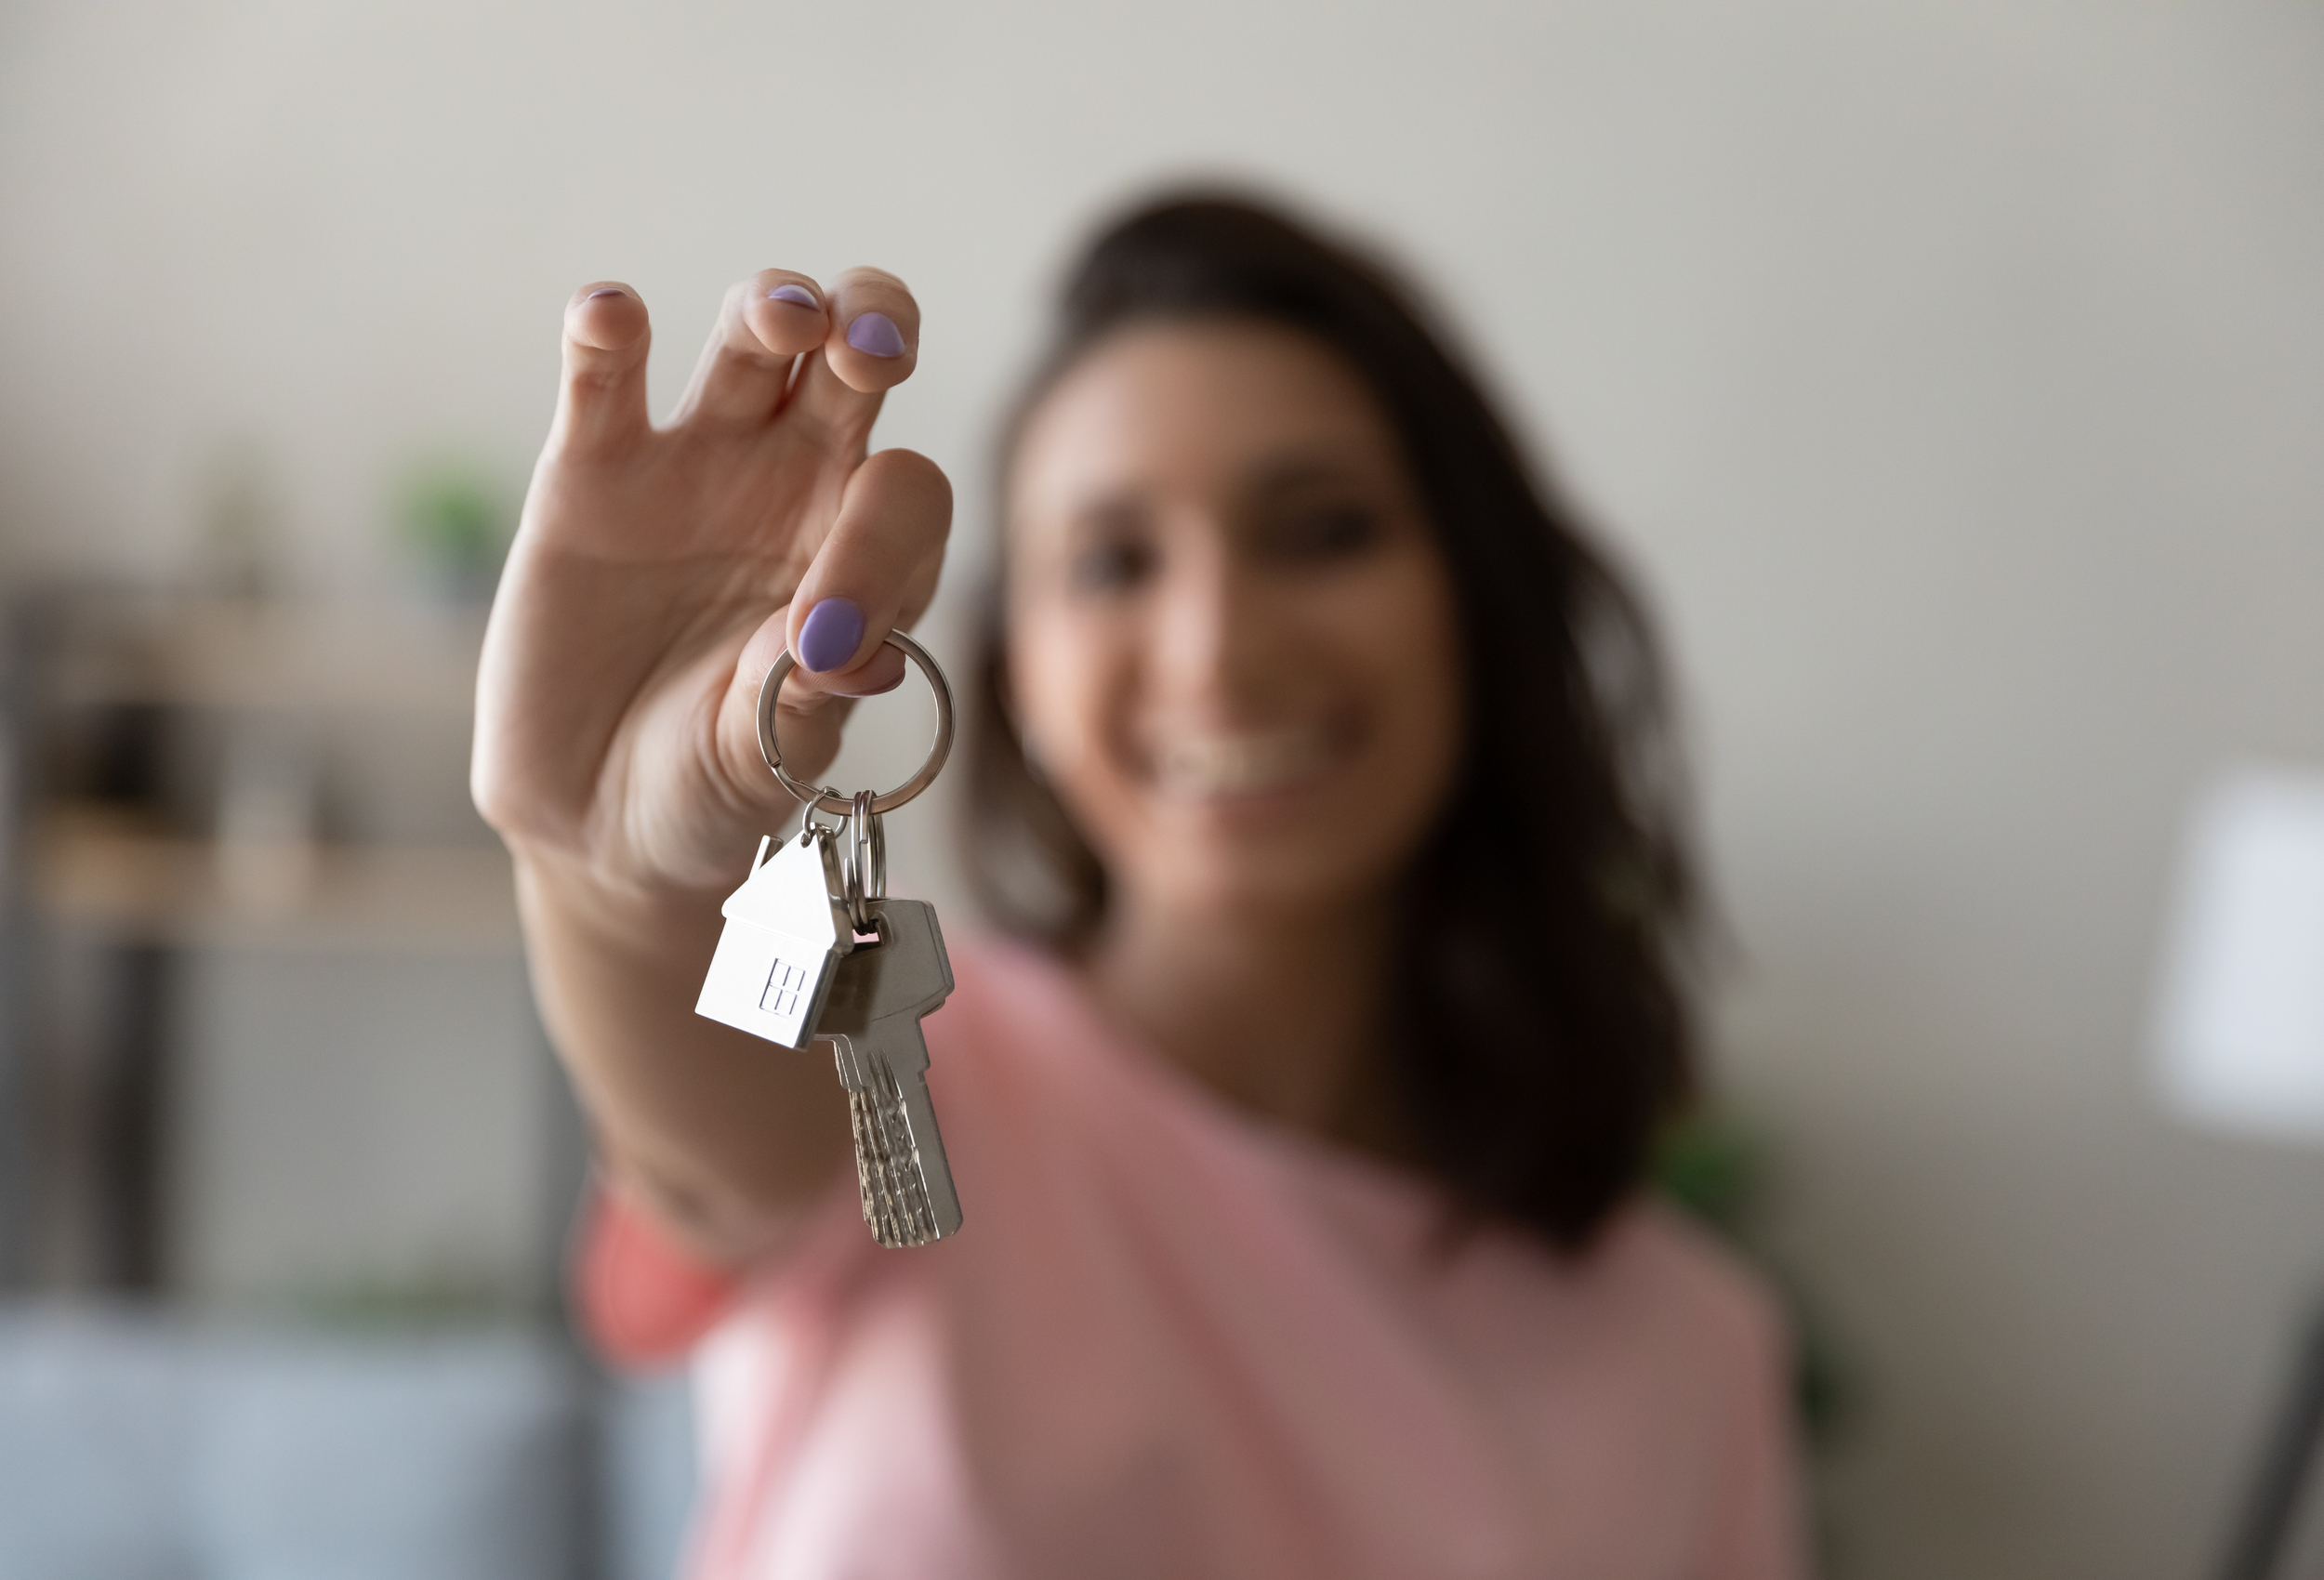 A woman holding out house keys.